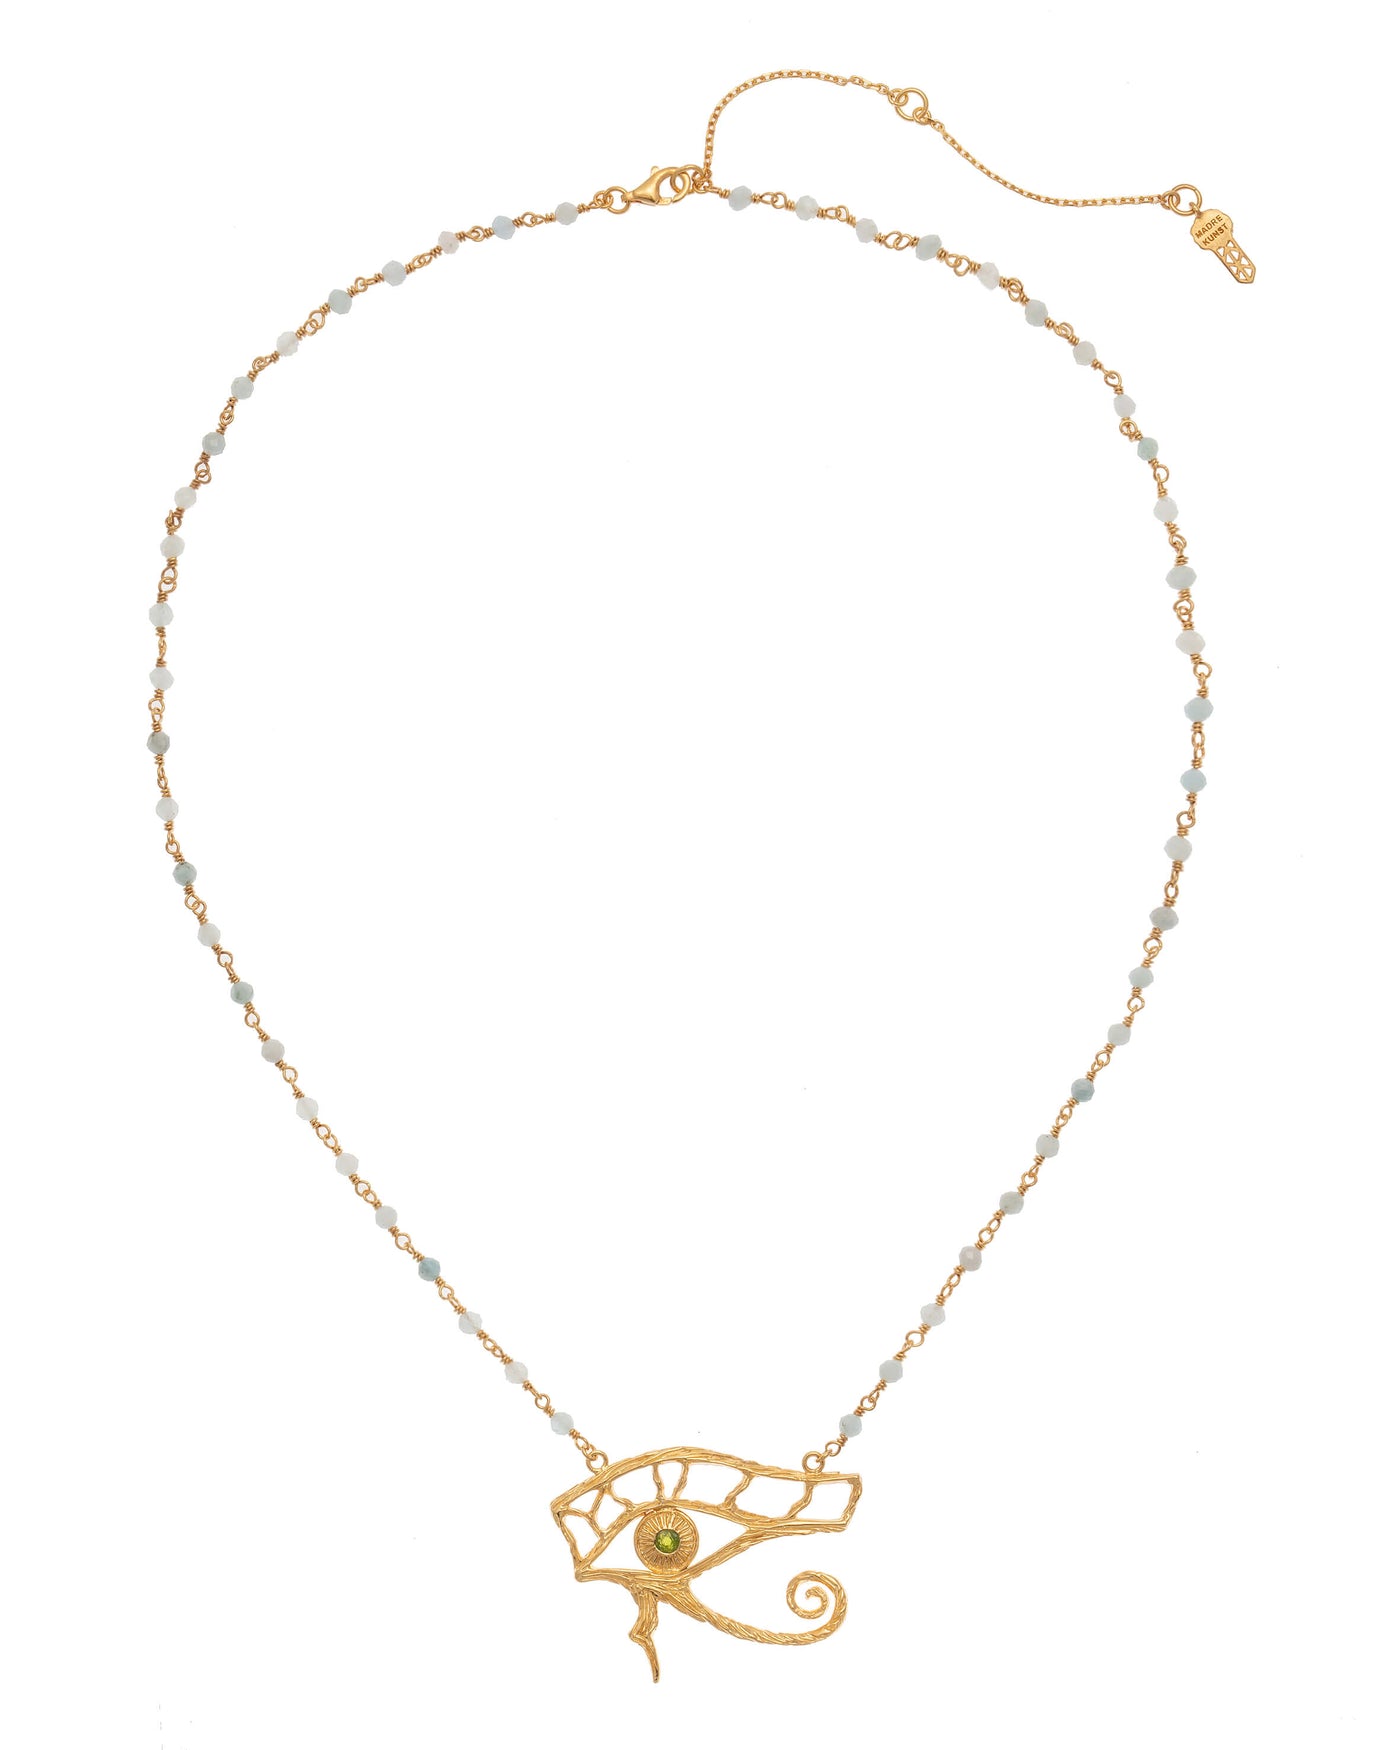 Eye of Horus handmade necklace with silver wire and natural stone beads. Silver, gold-plated